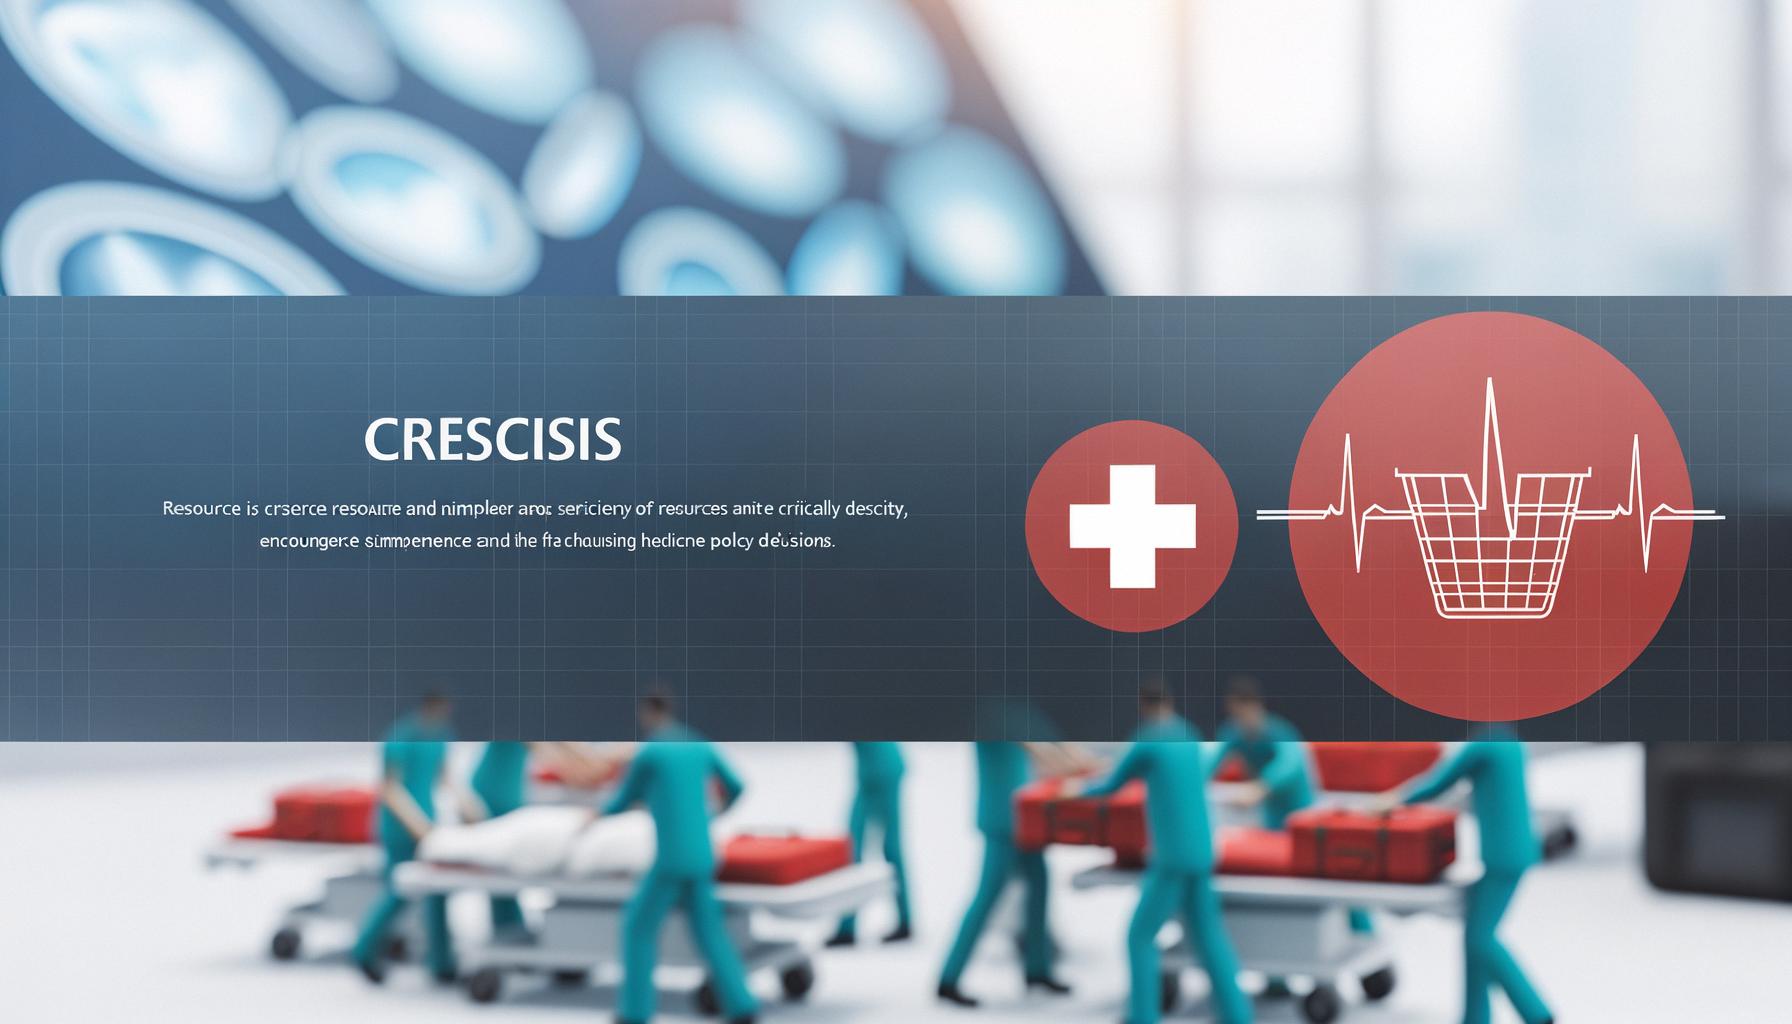 Emergency medicine under crises of resources and policy